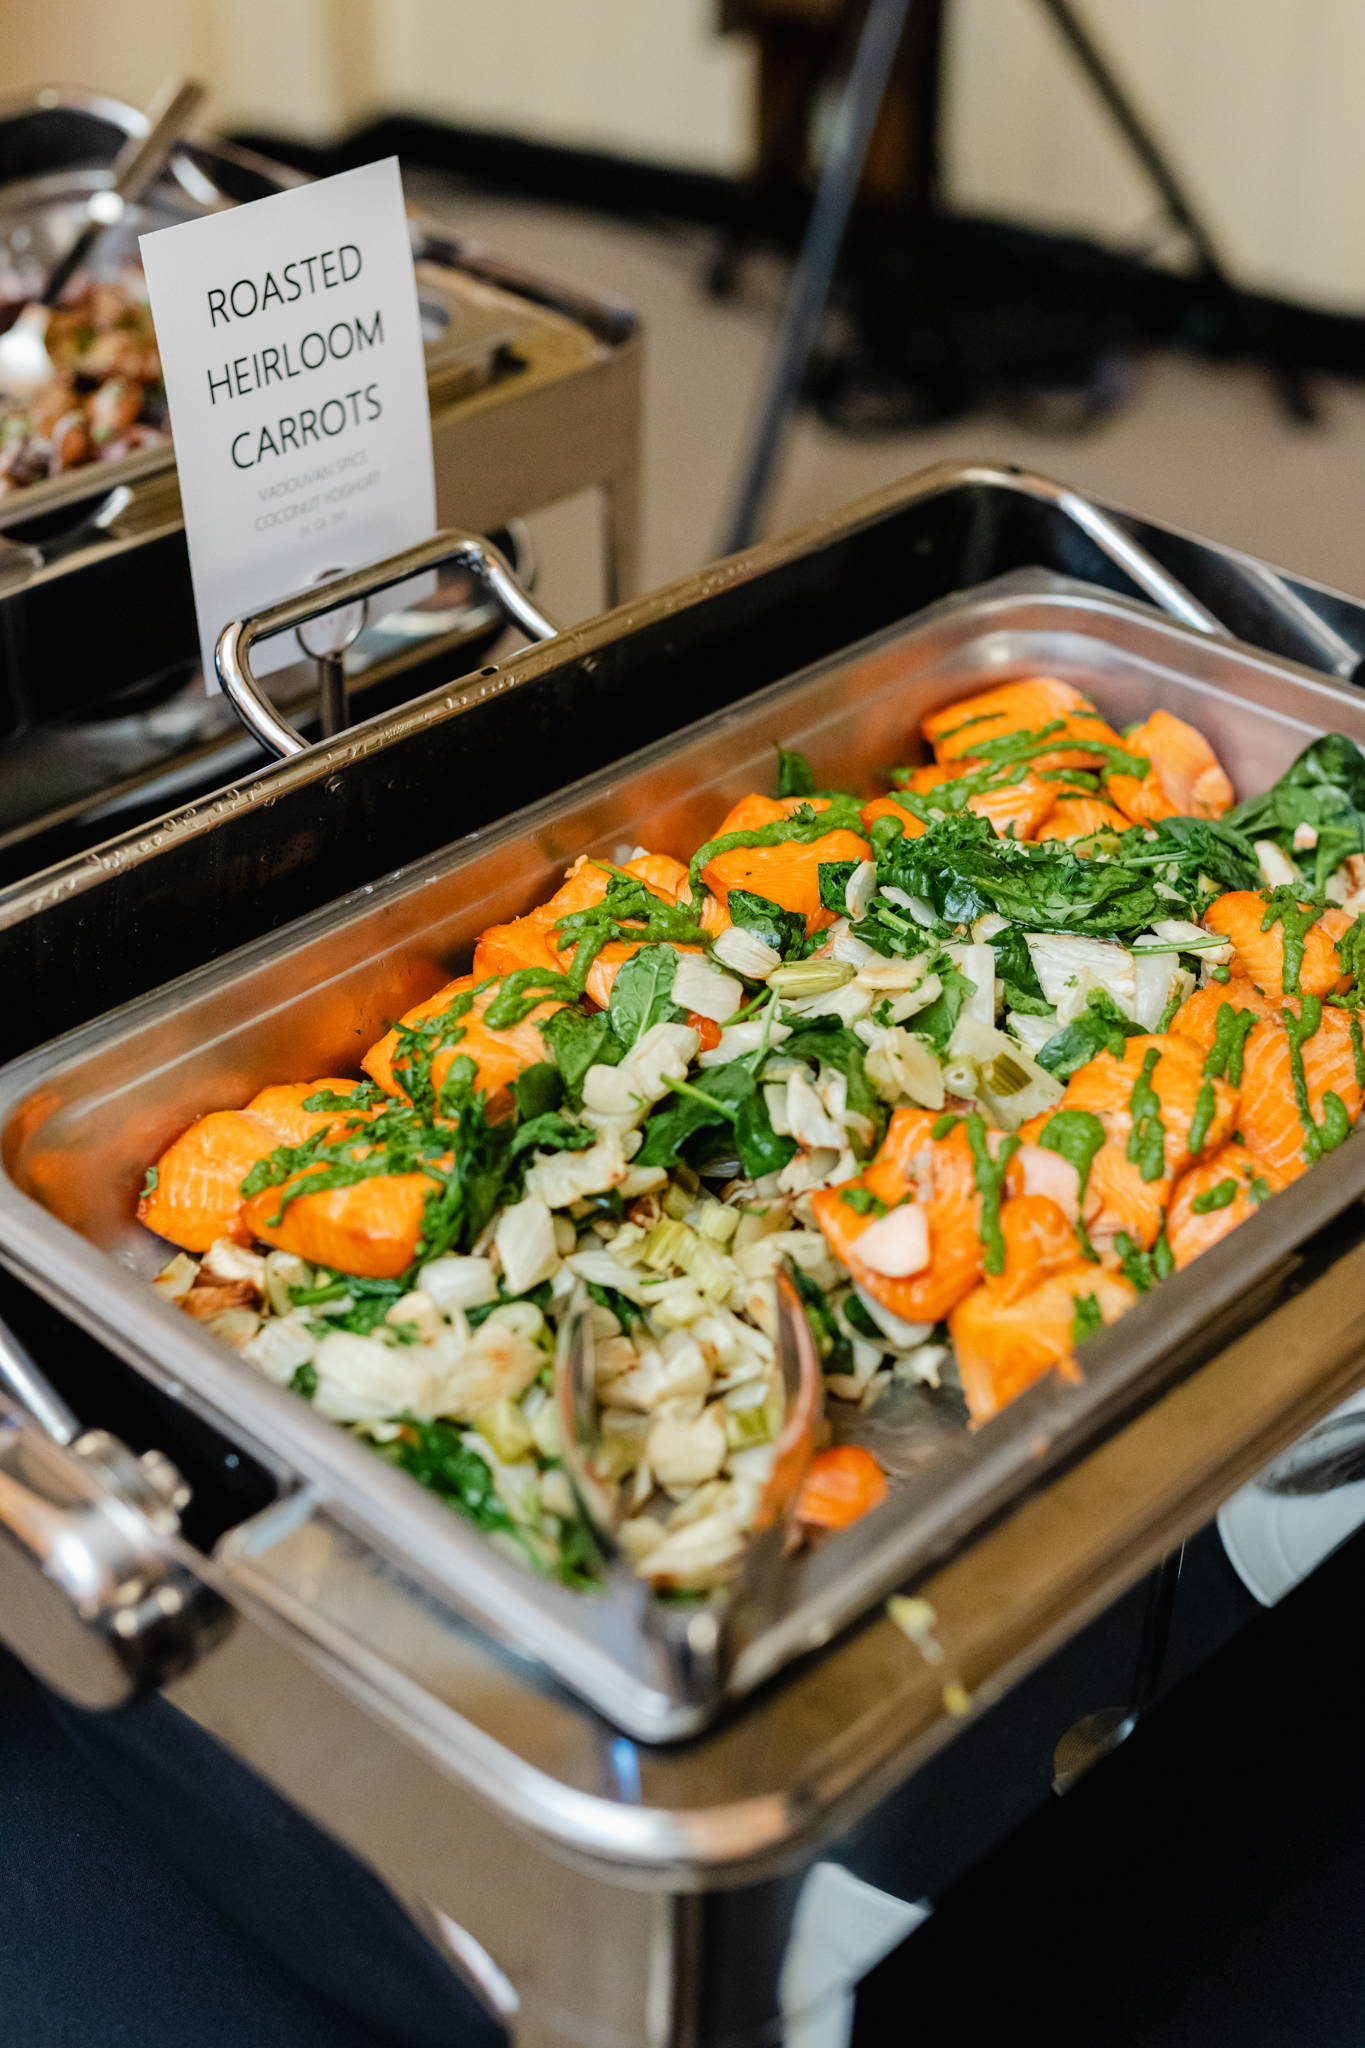 A tray of food on a table captured in conference photography.